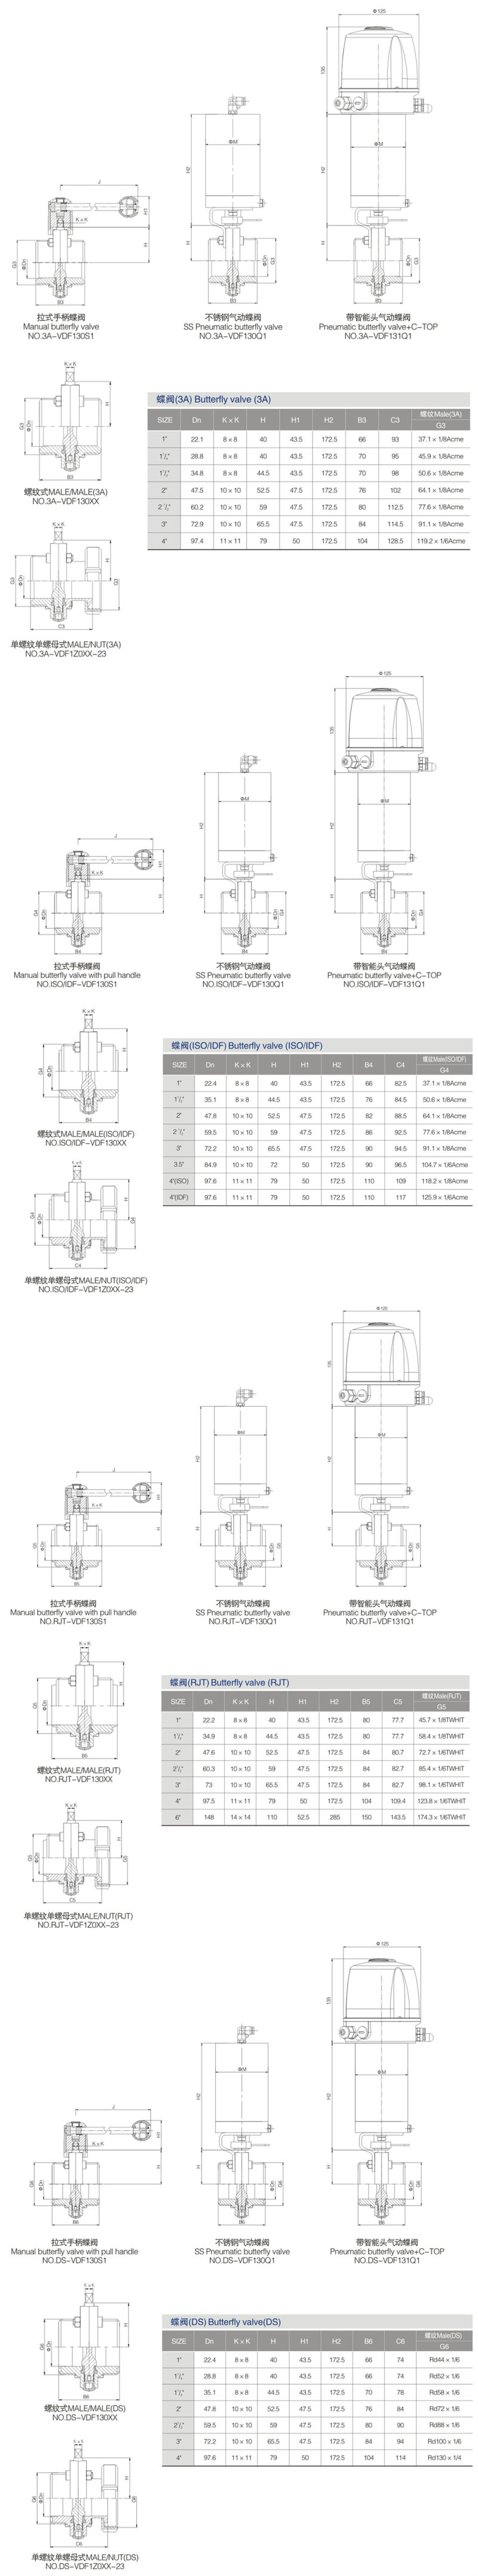 Pneumatic Butterfly Stainless Steel Sanitary Valve with Control Unit